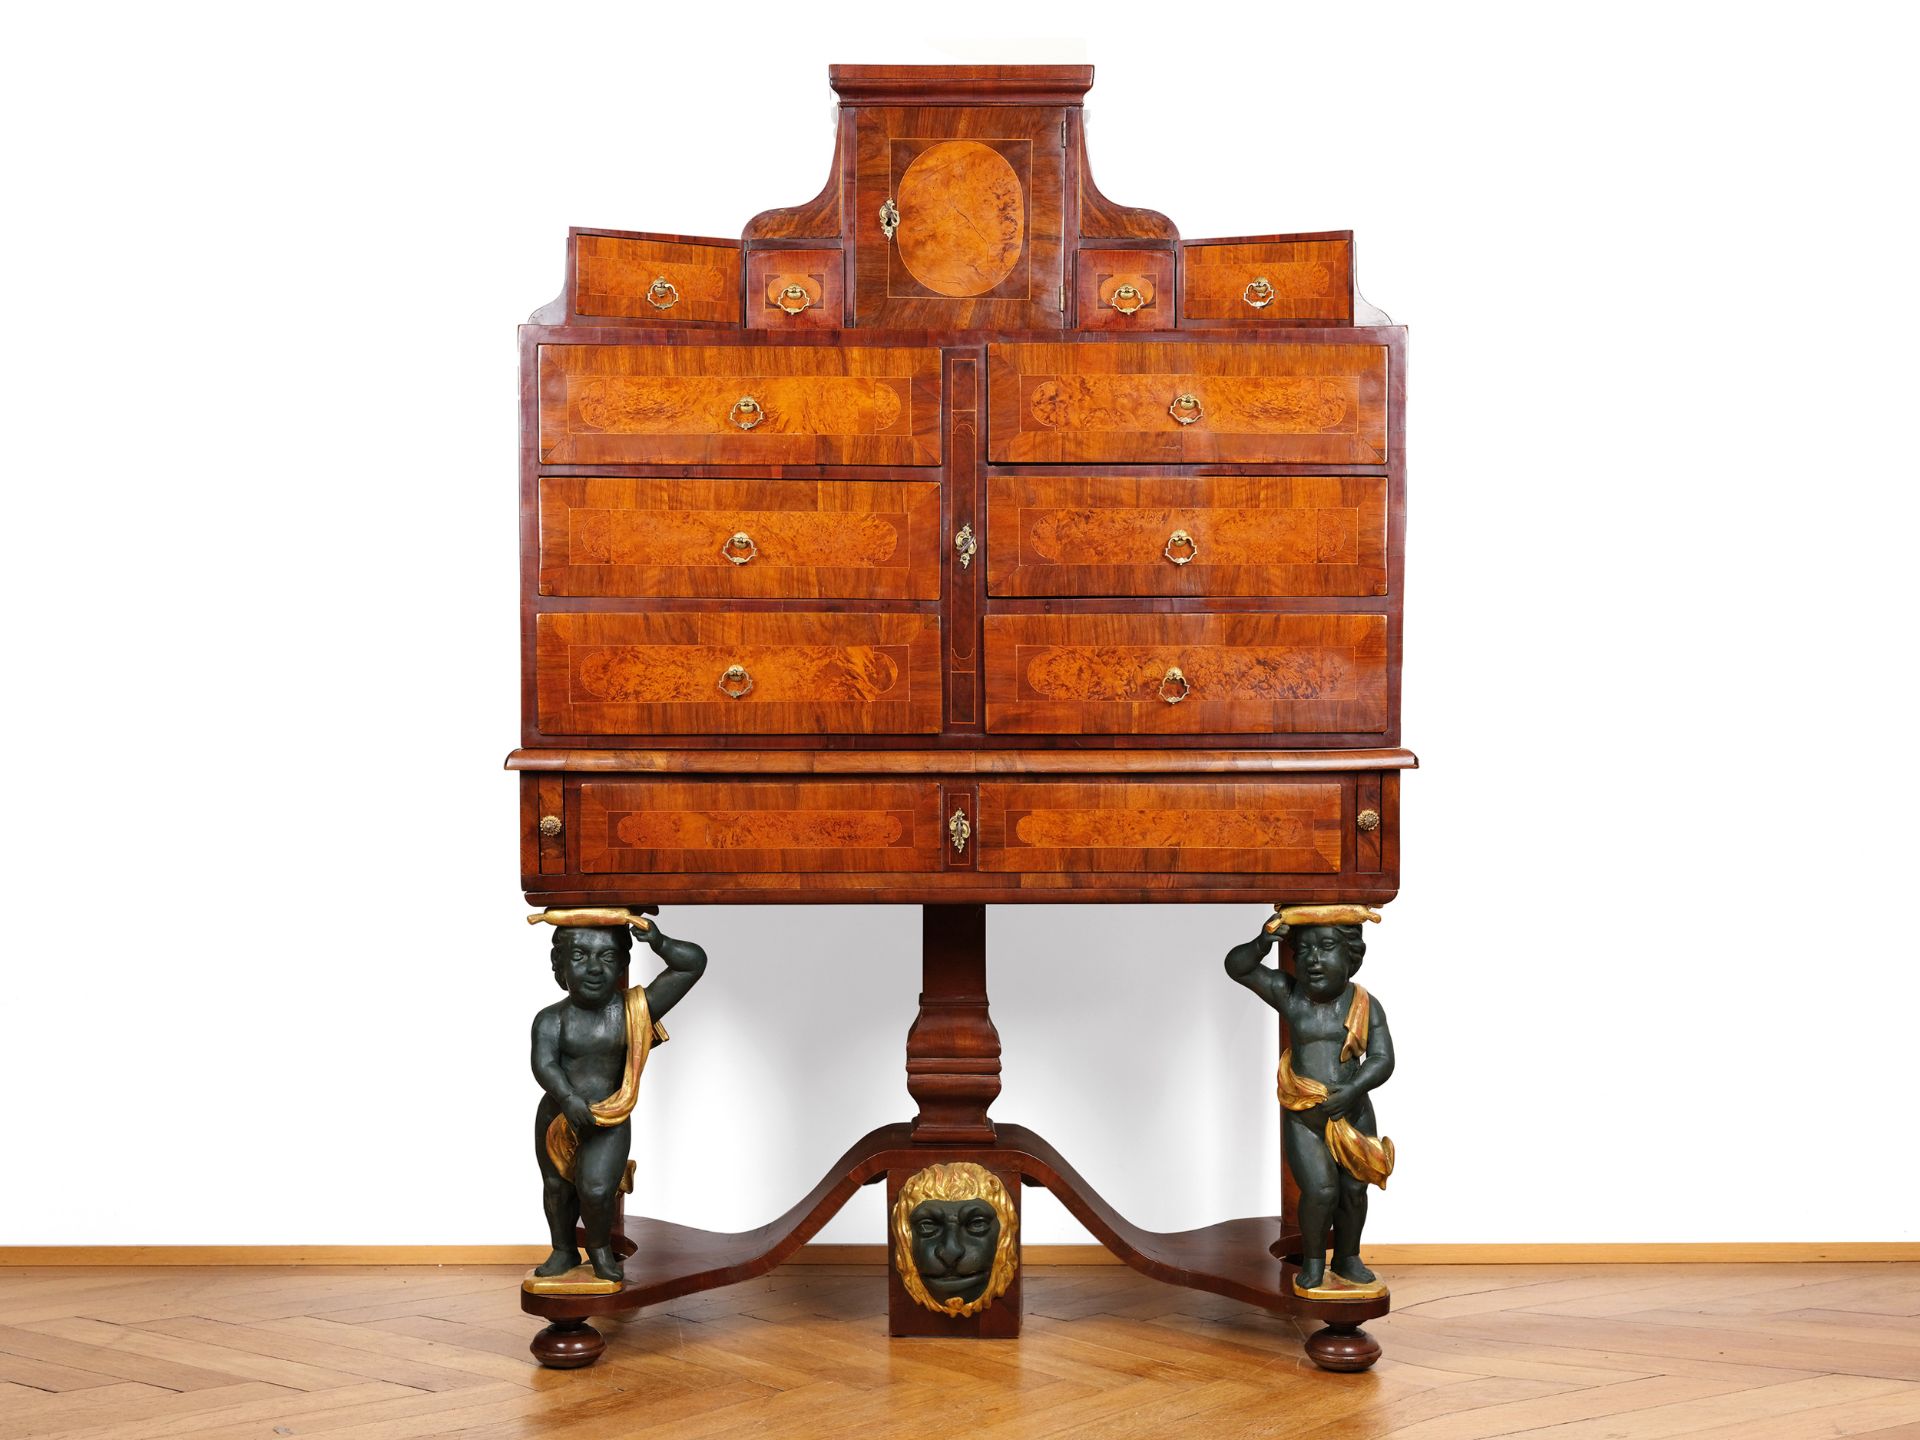 Top cabinet, South German, Mid-18th century